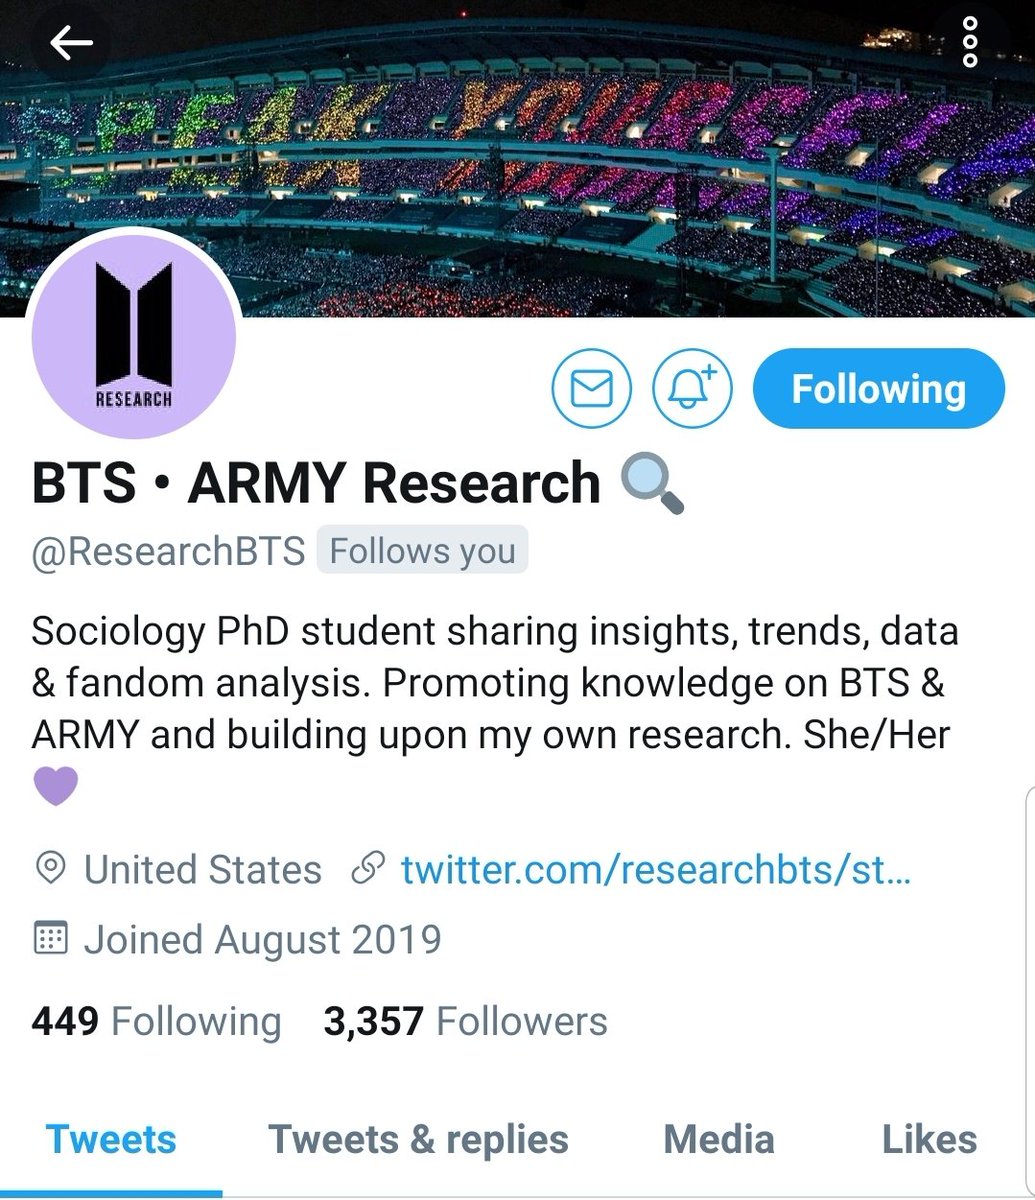 There are also many intelligent ARMYs who do diligent research. An account I want to shout out is  @ResearchBTS, run by an ARMY PhD student that is doing research on BTS and their social engagement. Their account is dedicated to sharing their findings with others.